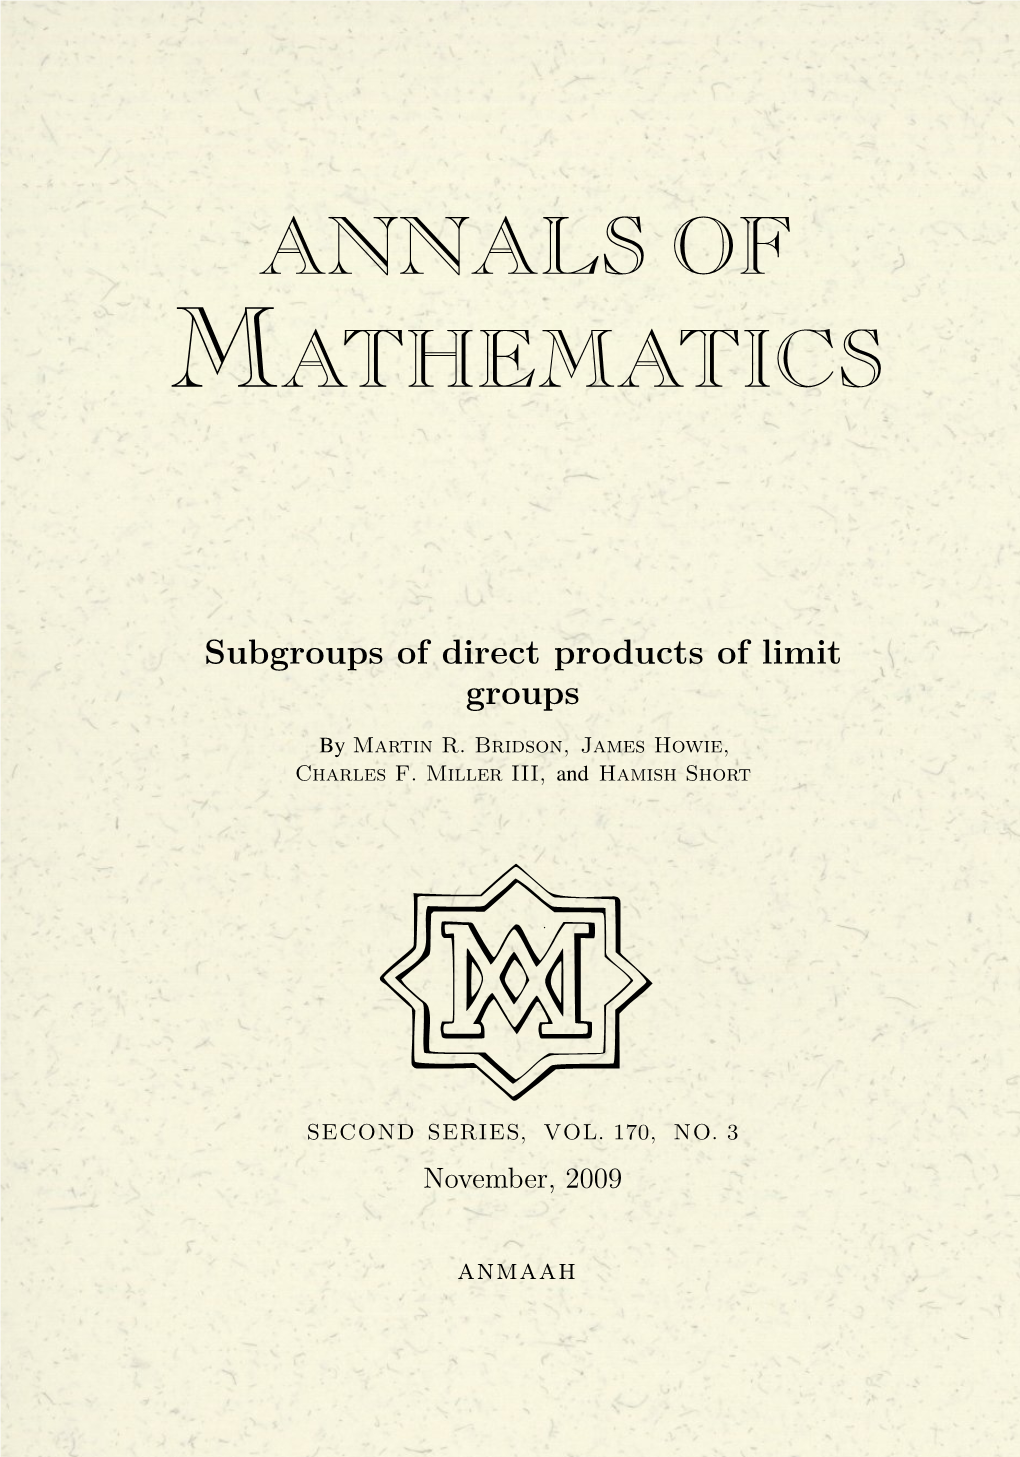 Subgroups of Direct Products of Limit Groups